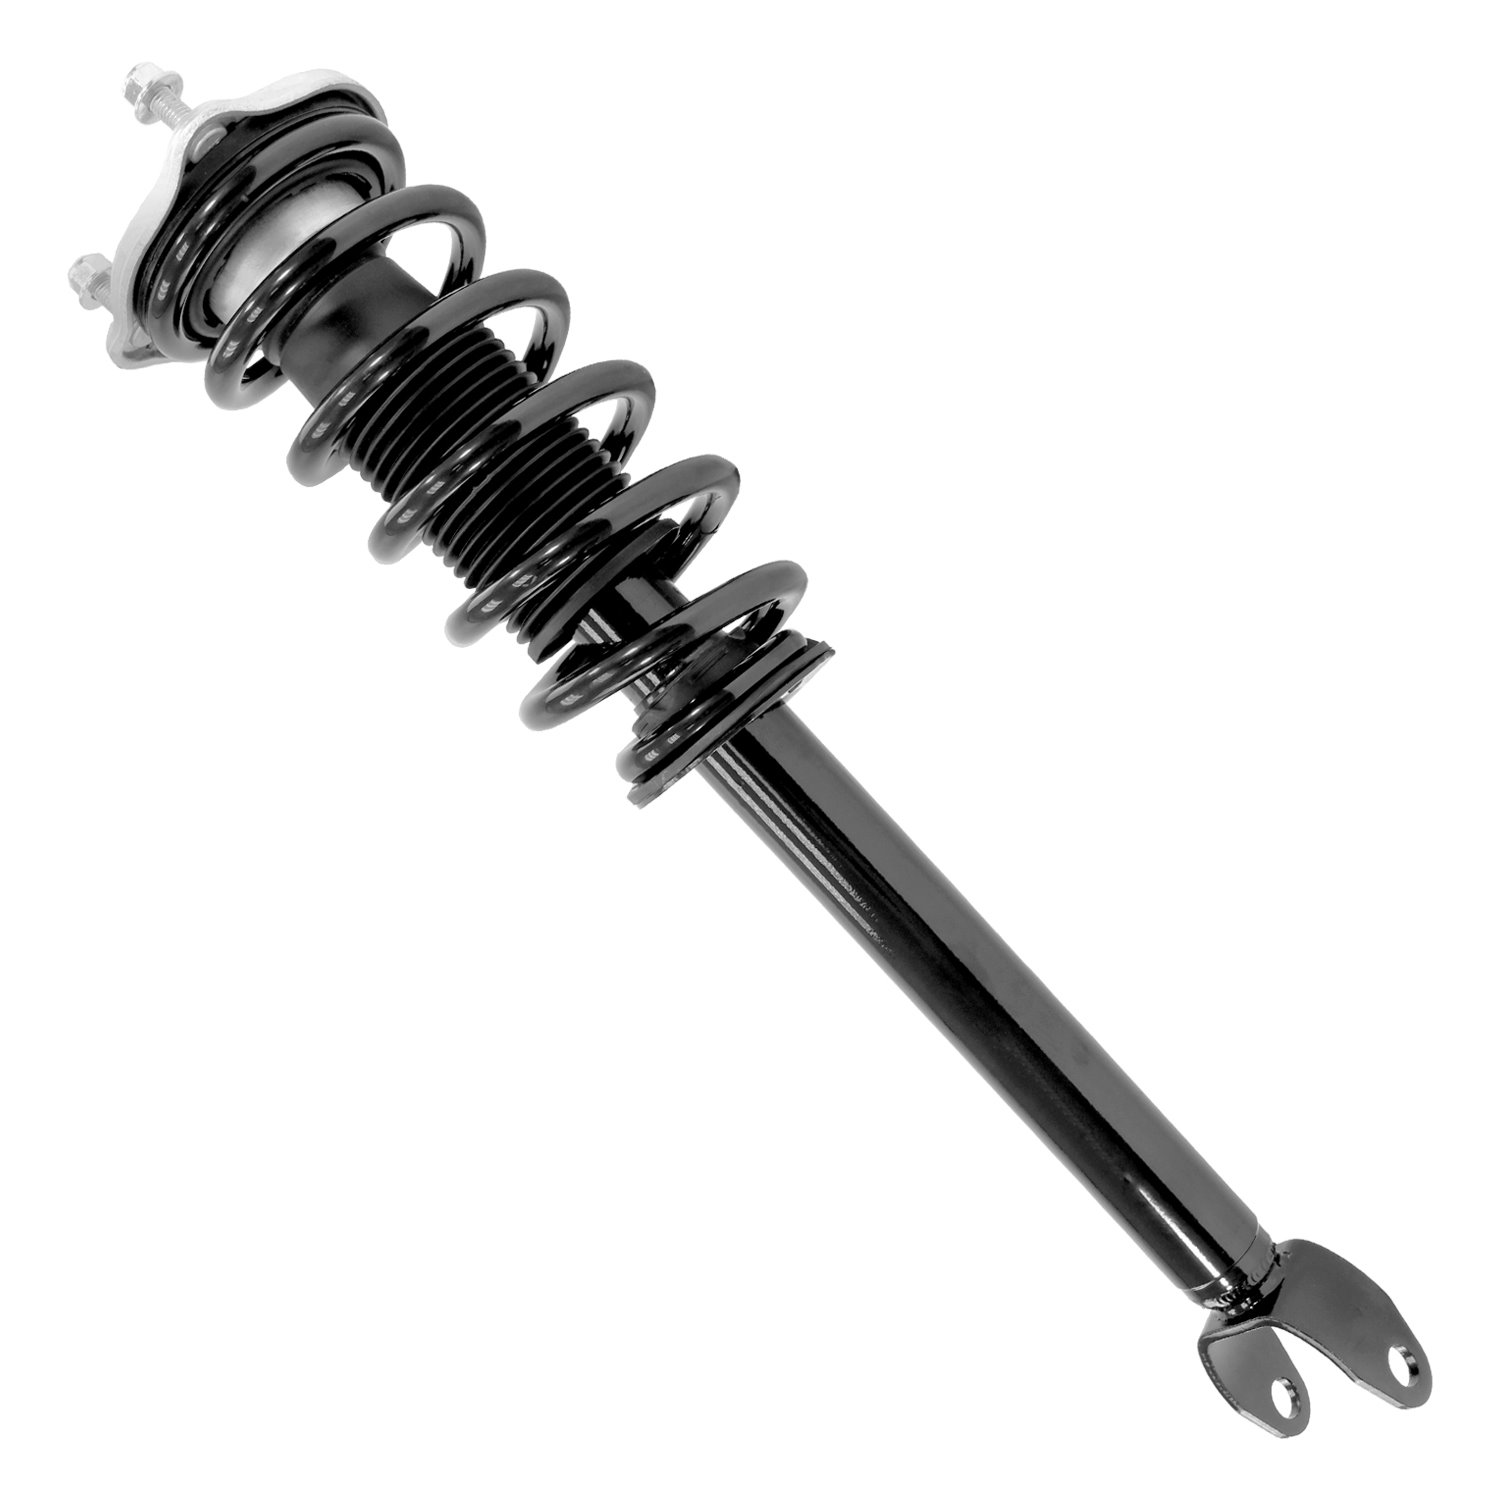 13450 Front Suspension Strut & Coil Spring Assemby Fits Select Mercedes-Benz C63 AMG S, Mercedes-Benz C300